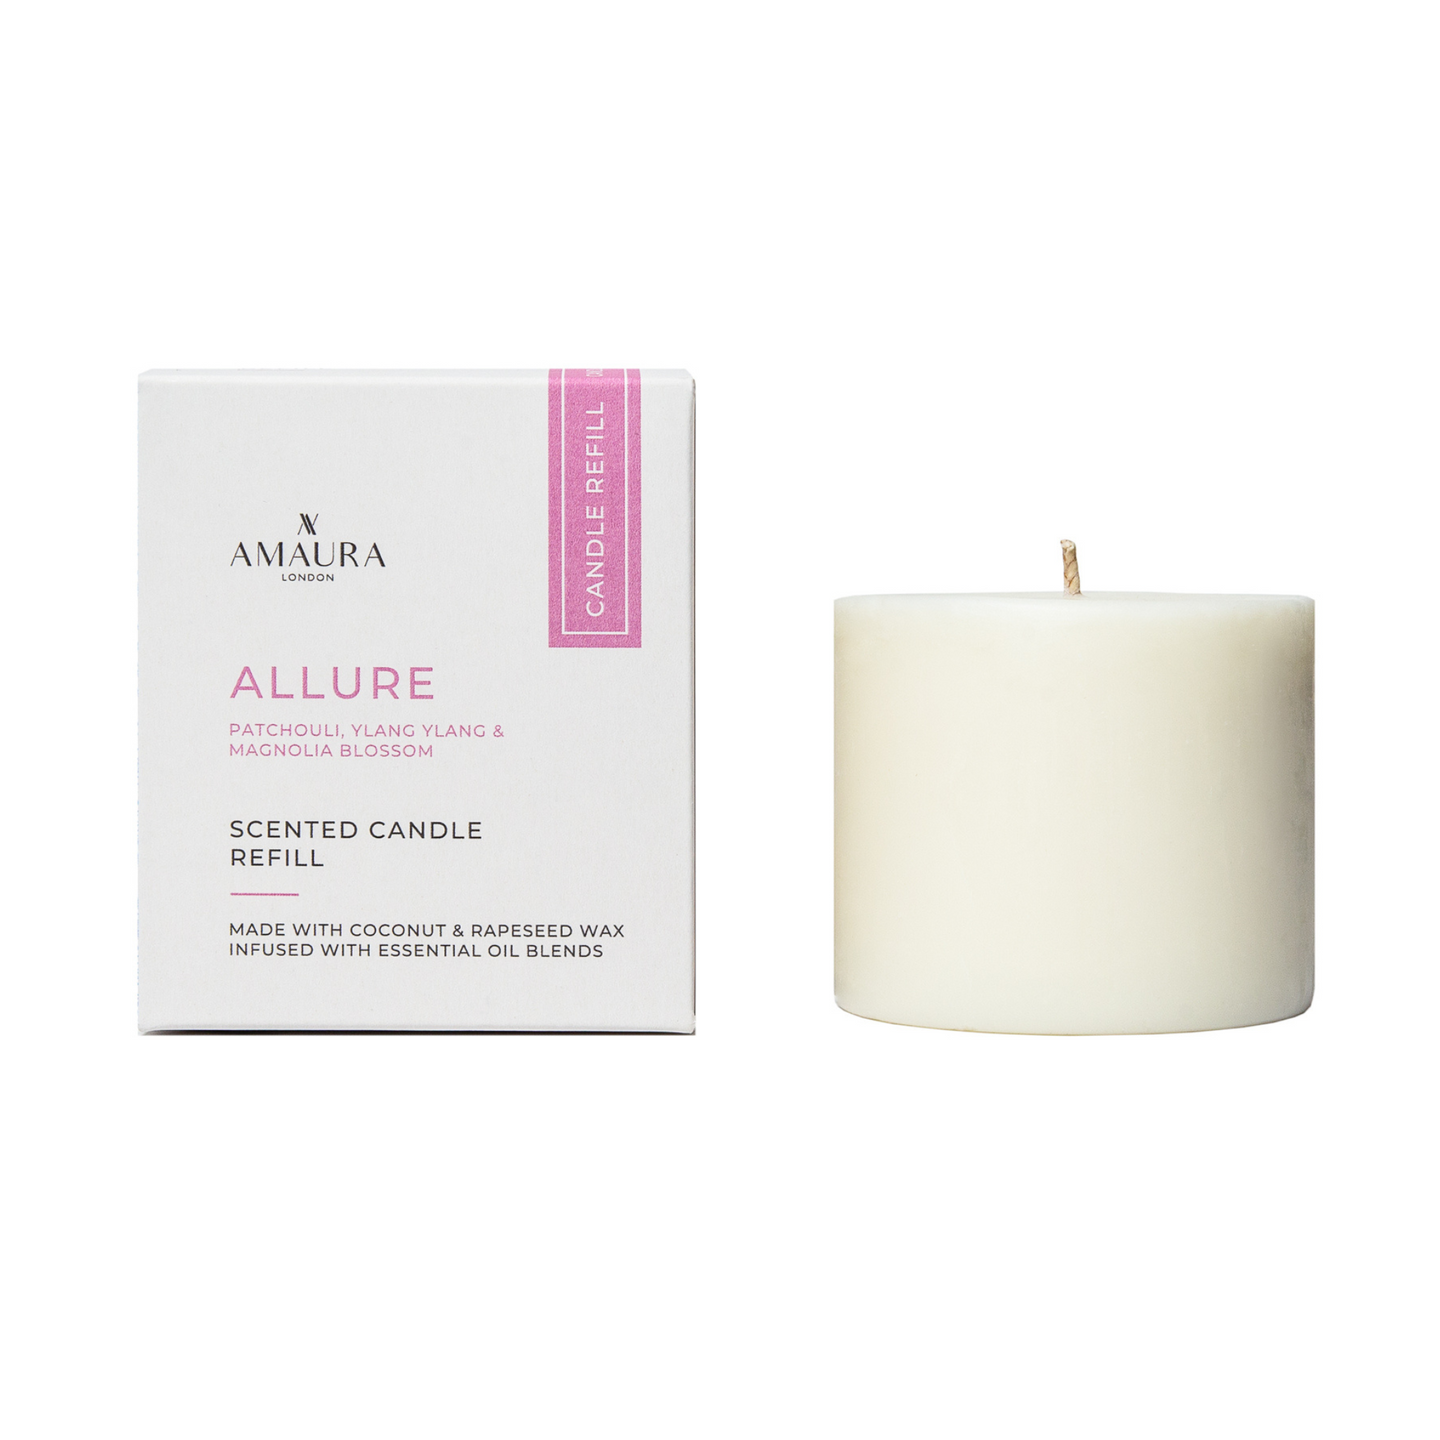 Allure | Patchouli, Ylang Ylang & Magnolia Blossom | Candle Refill | Pre-Order